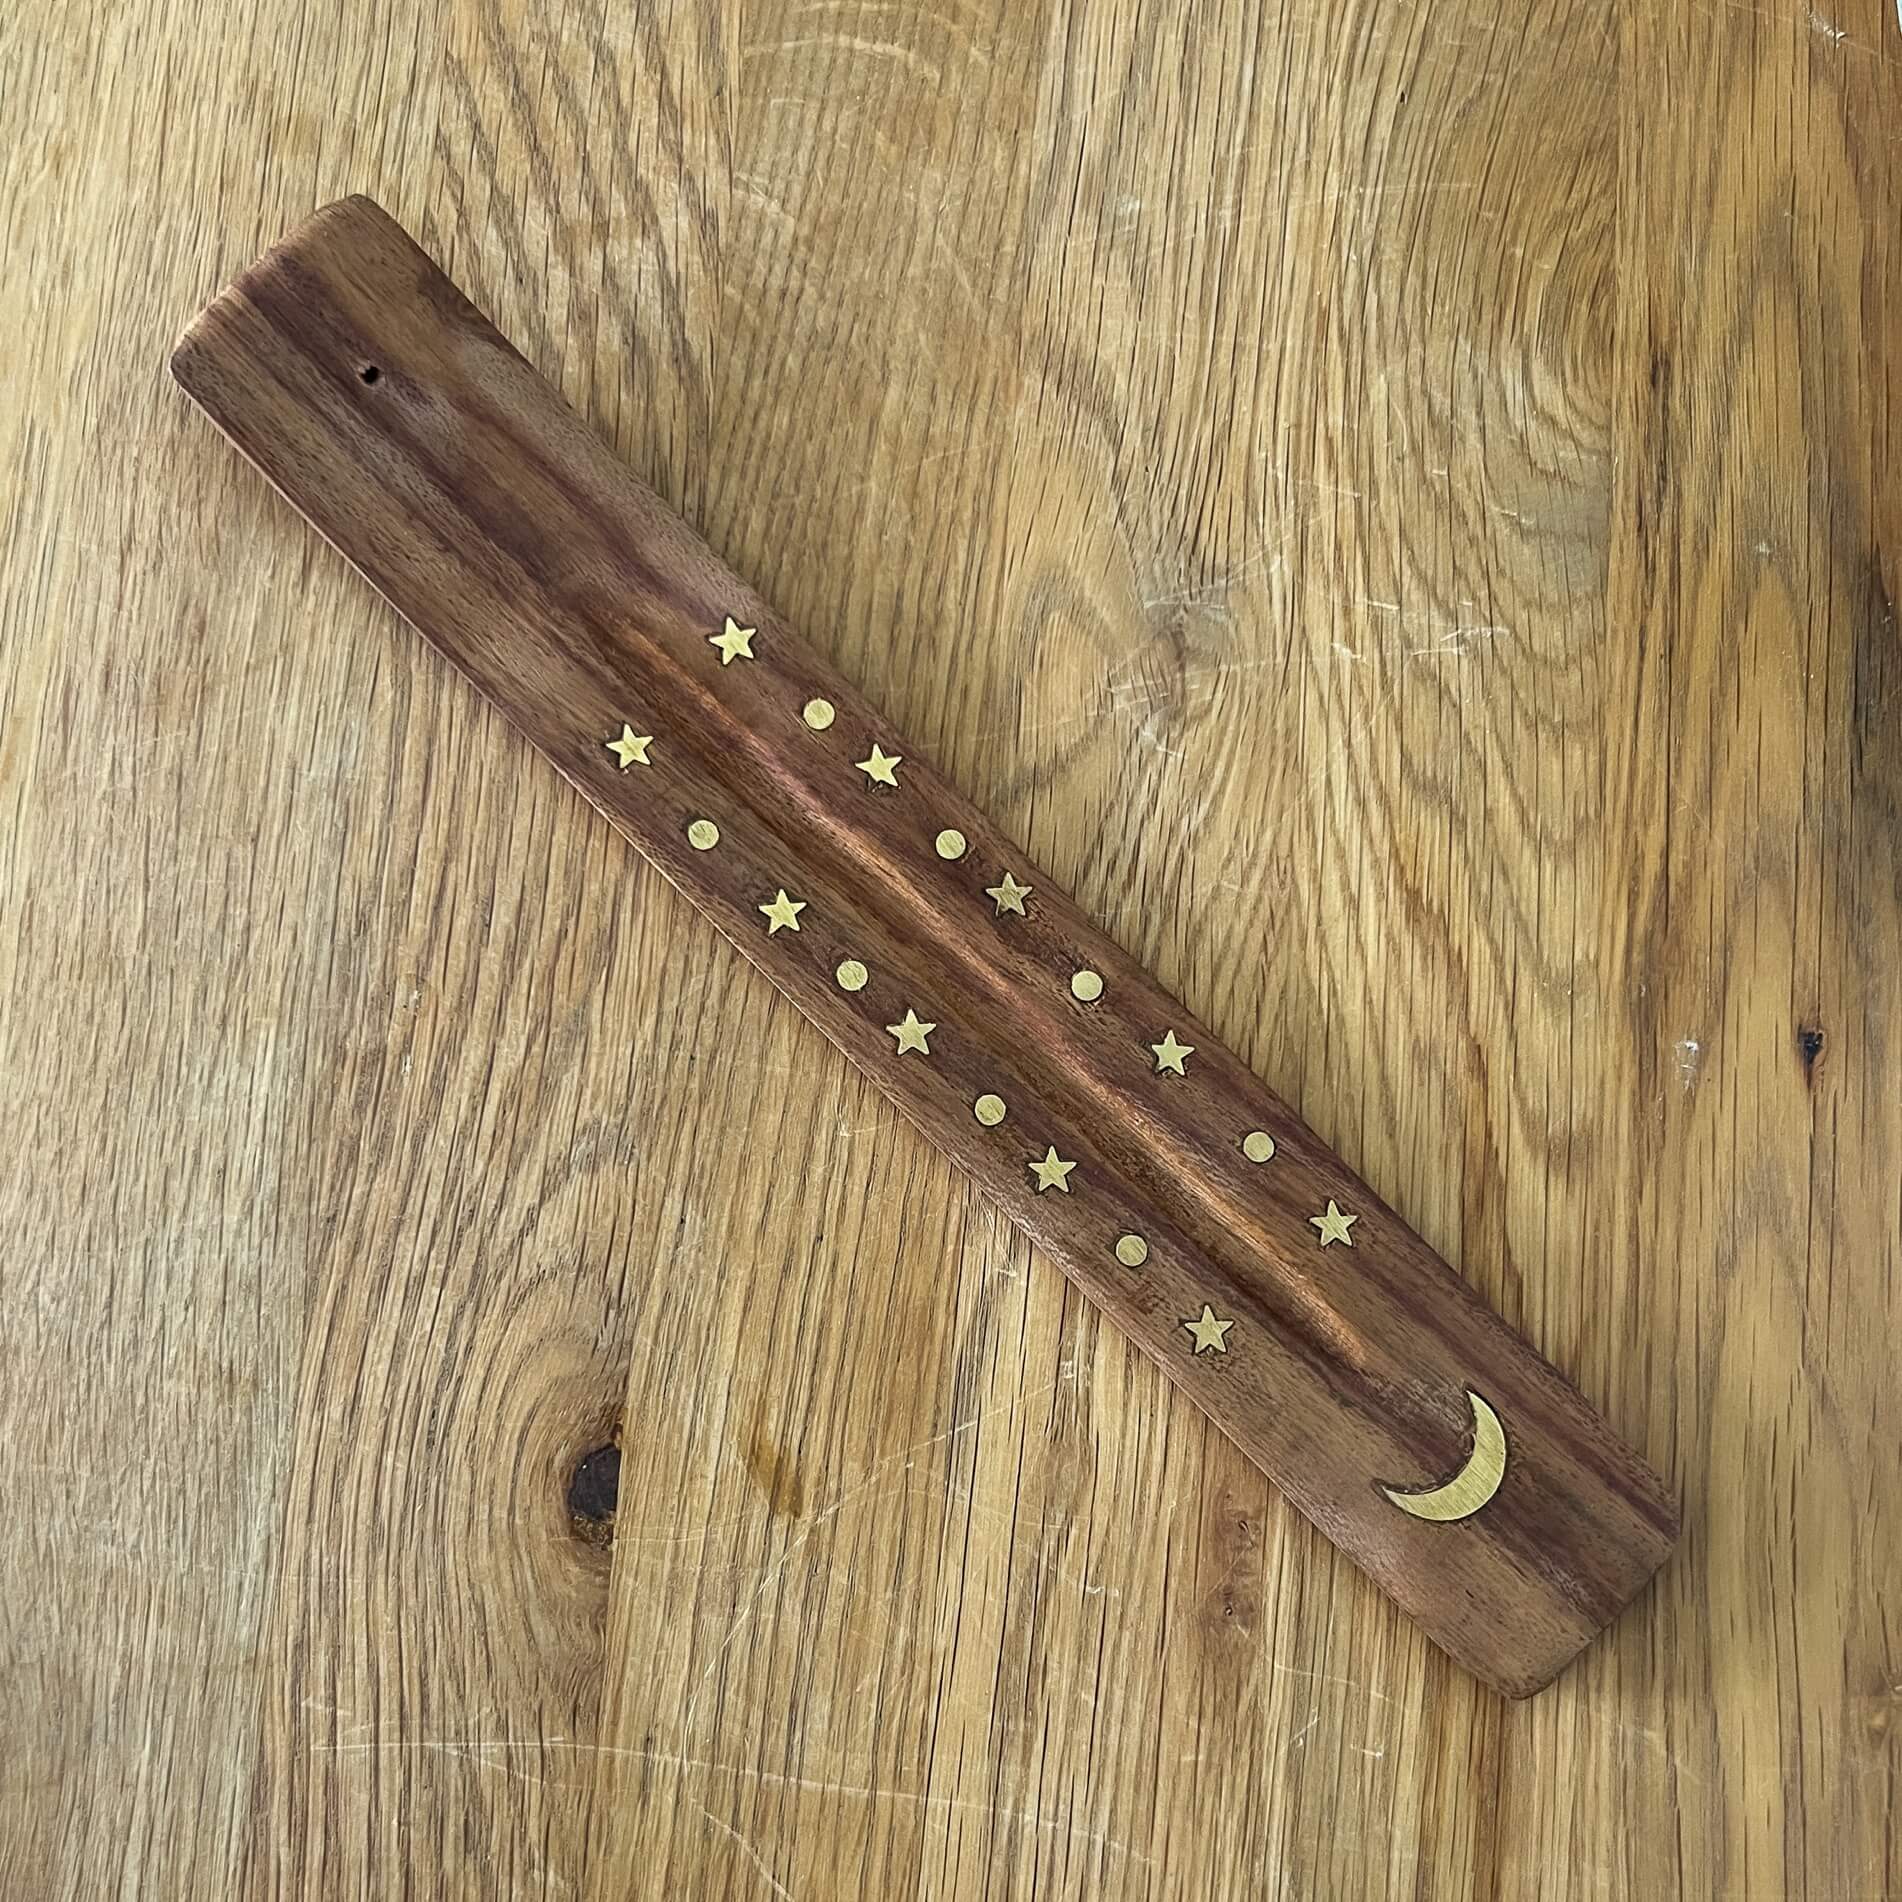 Mango wood ski incense holder with moon and star brass inlaid